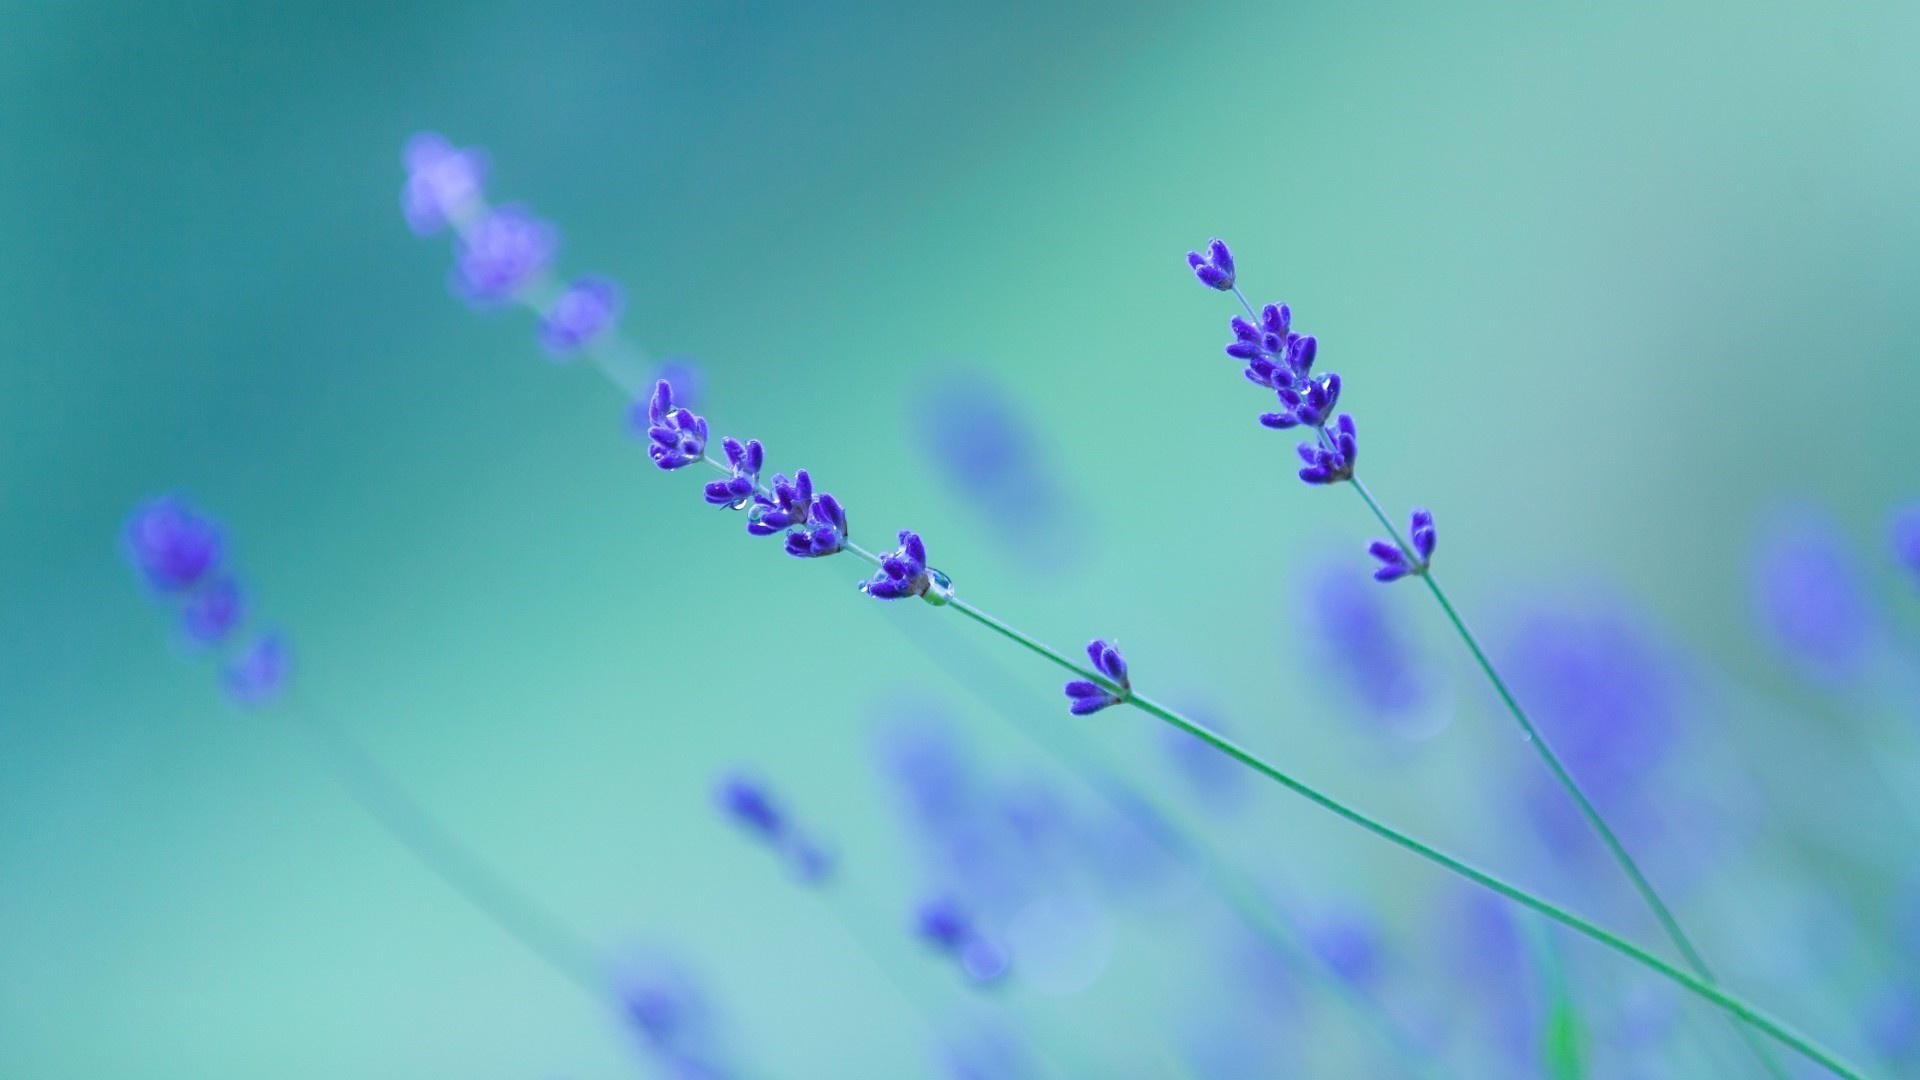 Lavender wallpapers, Diverse choices, Floral beauty, Natural essence, 1920x1080 Full HD Desktop